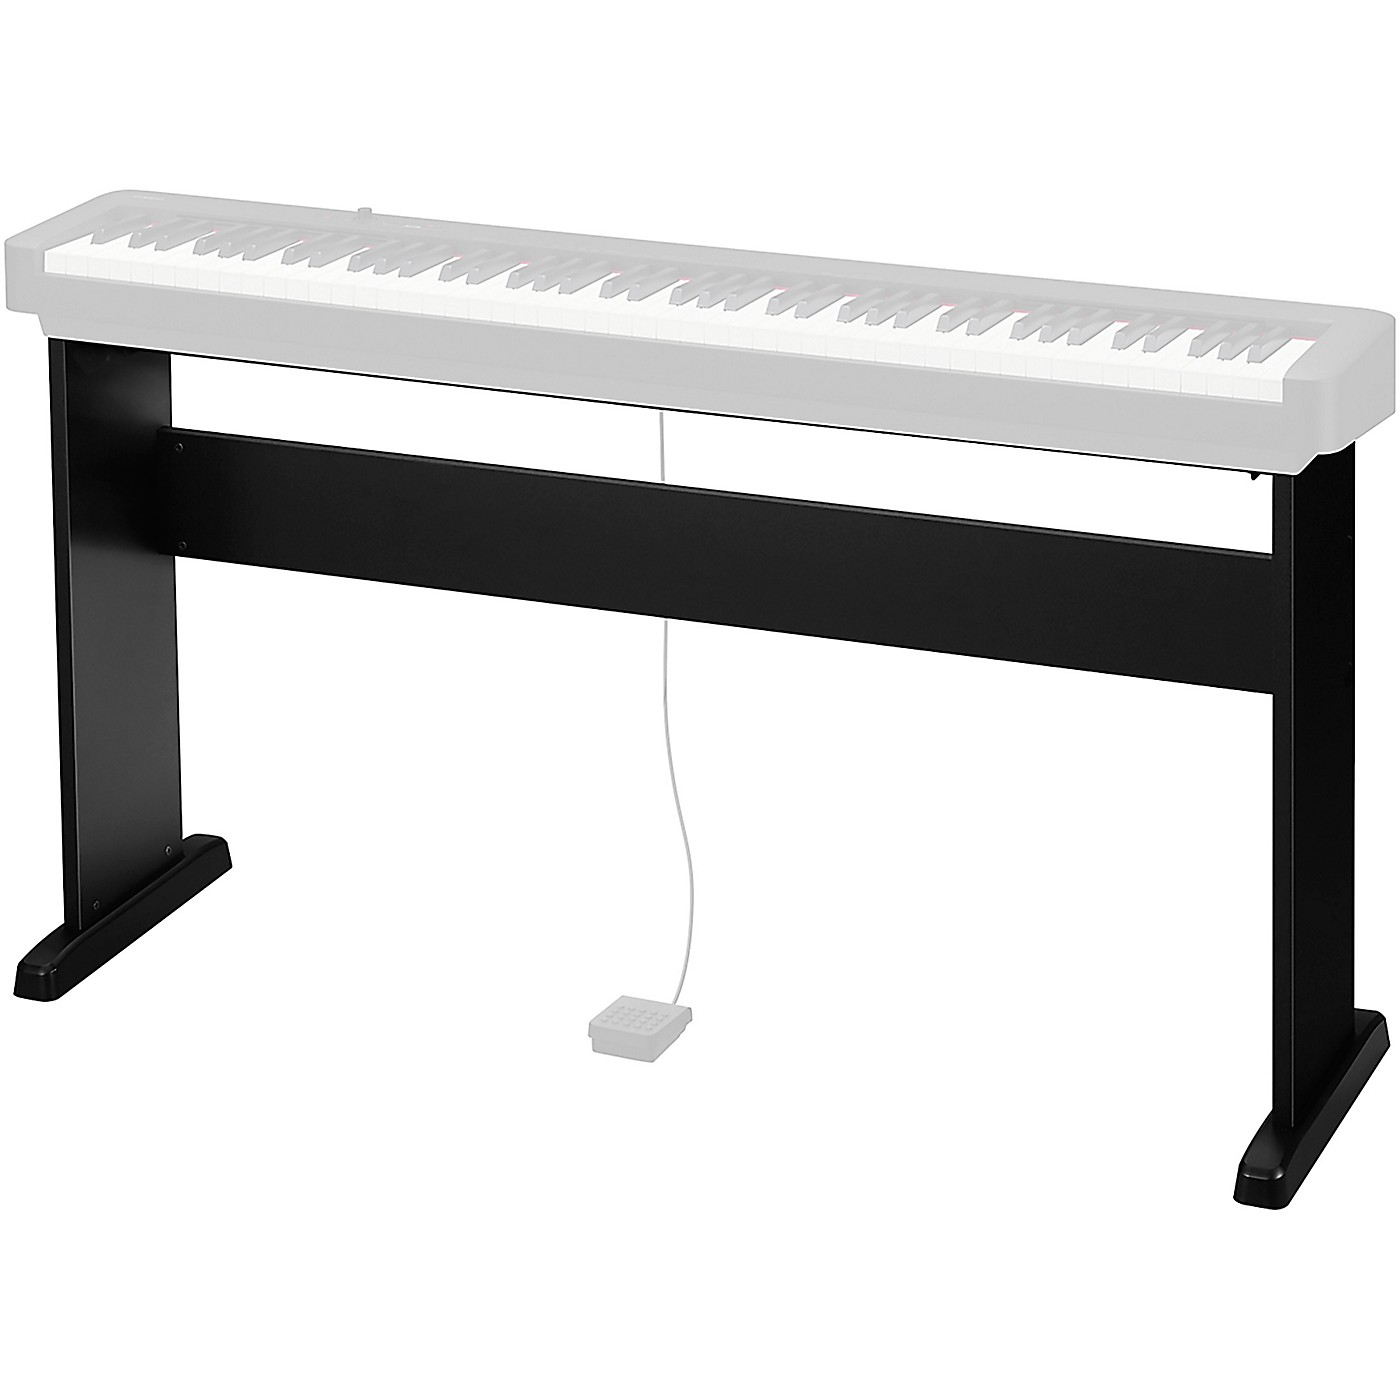 Casio CS-46 Stand for CDP-S100/CDP-S350 Digital Pianos thumbnail